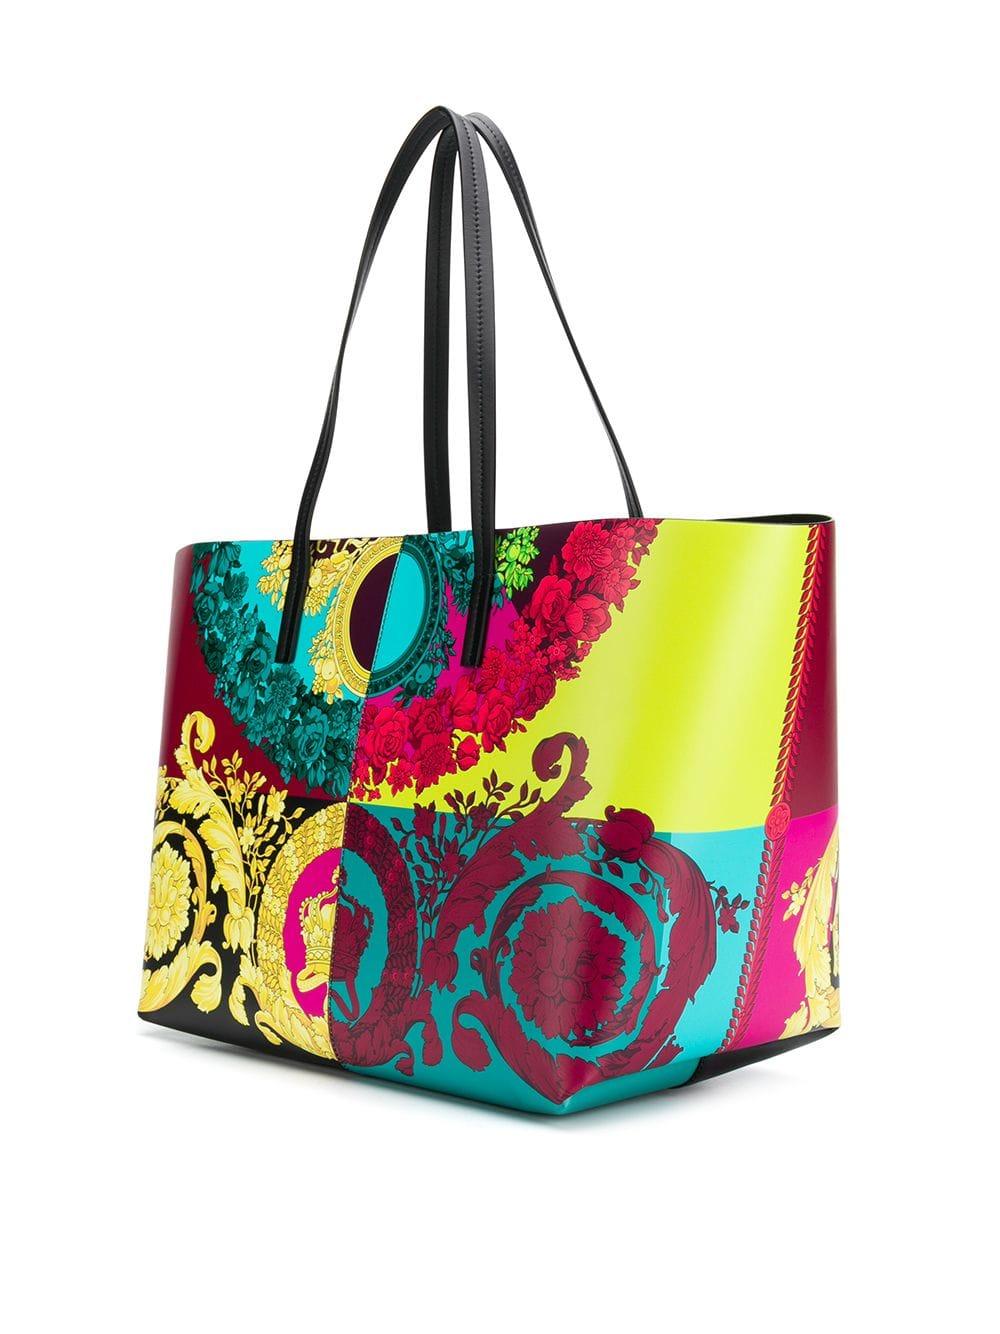 Versace Leather Voyage Baroque Print Tote Bag in Yellow - Lyst